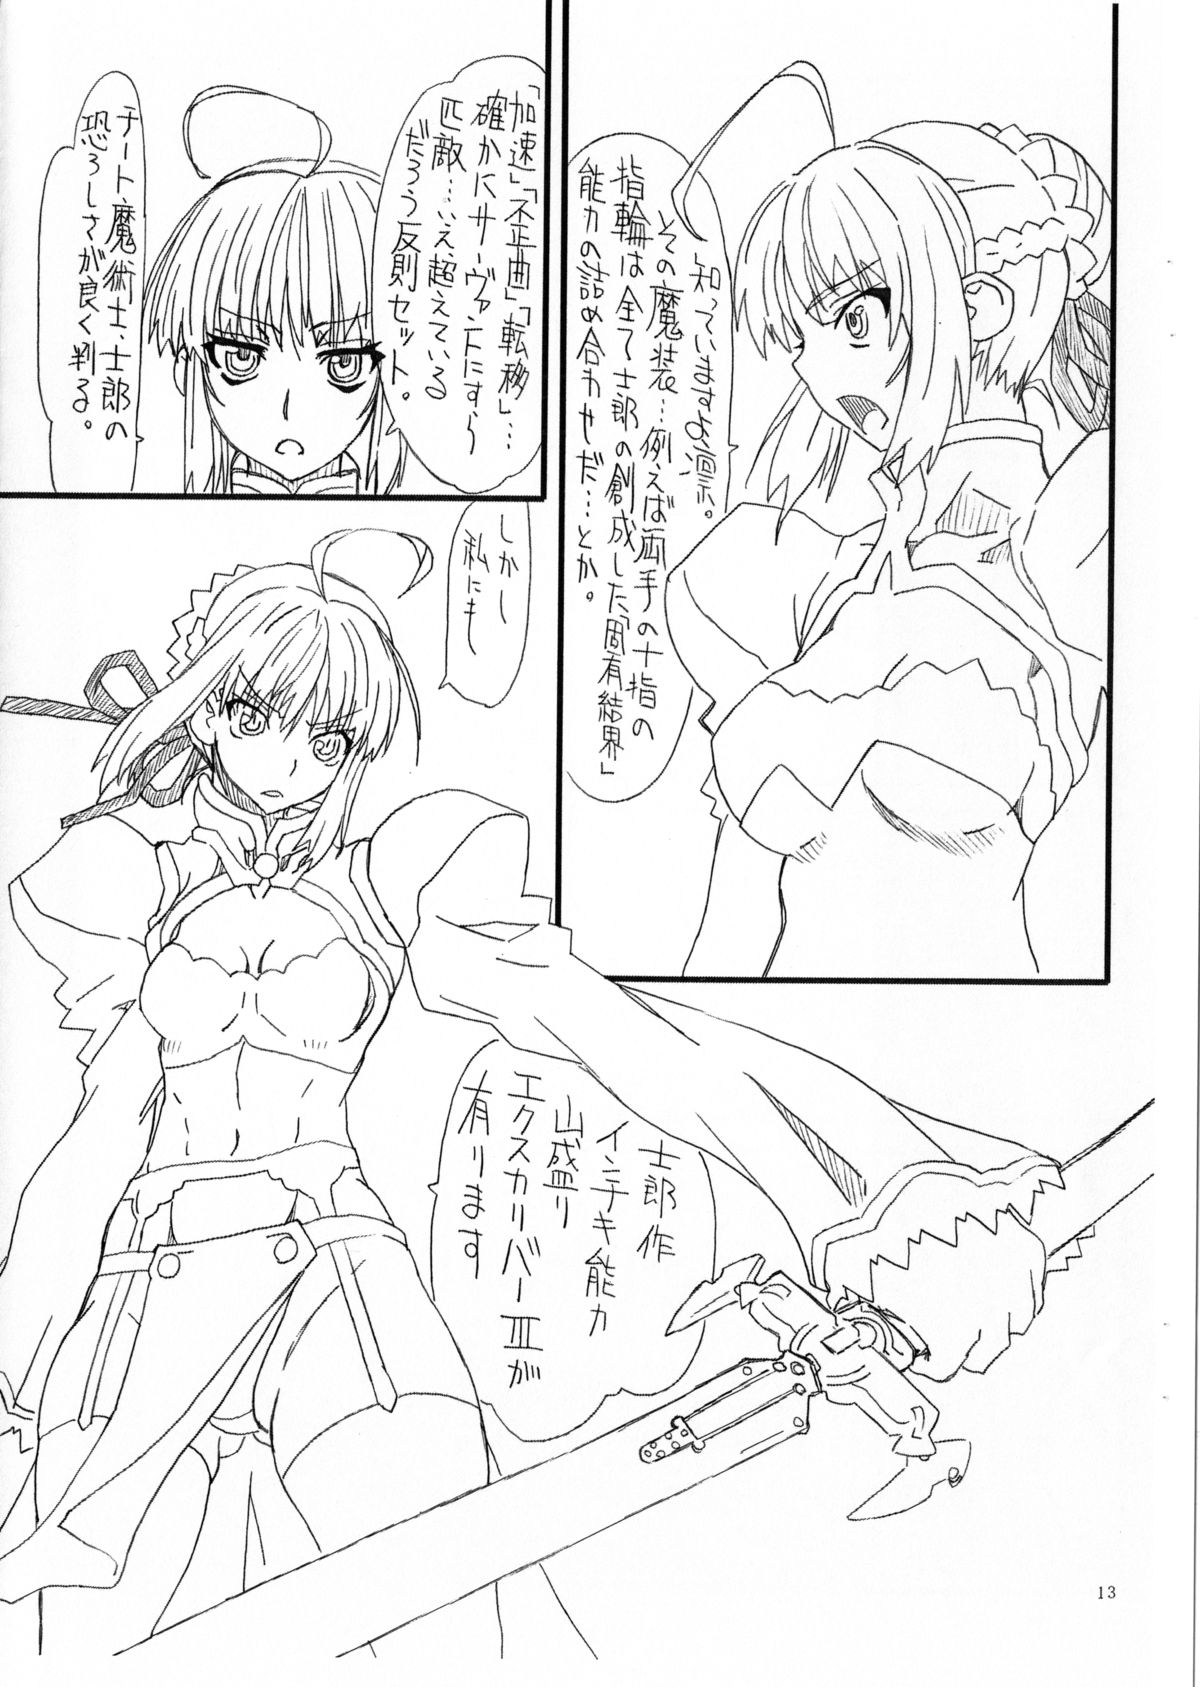 (SC65) [Power Slide (Uttorikun)] Rin to saber 1st Ver0.5 (Fate/stay night) page 14 full